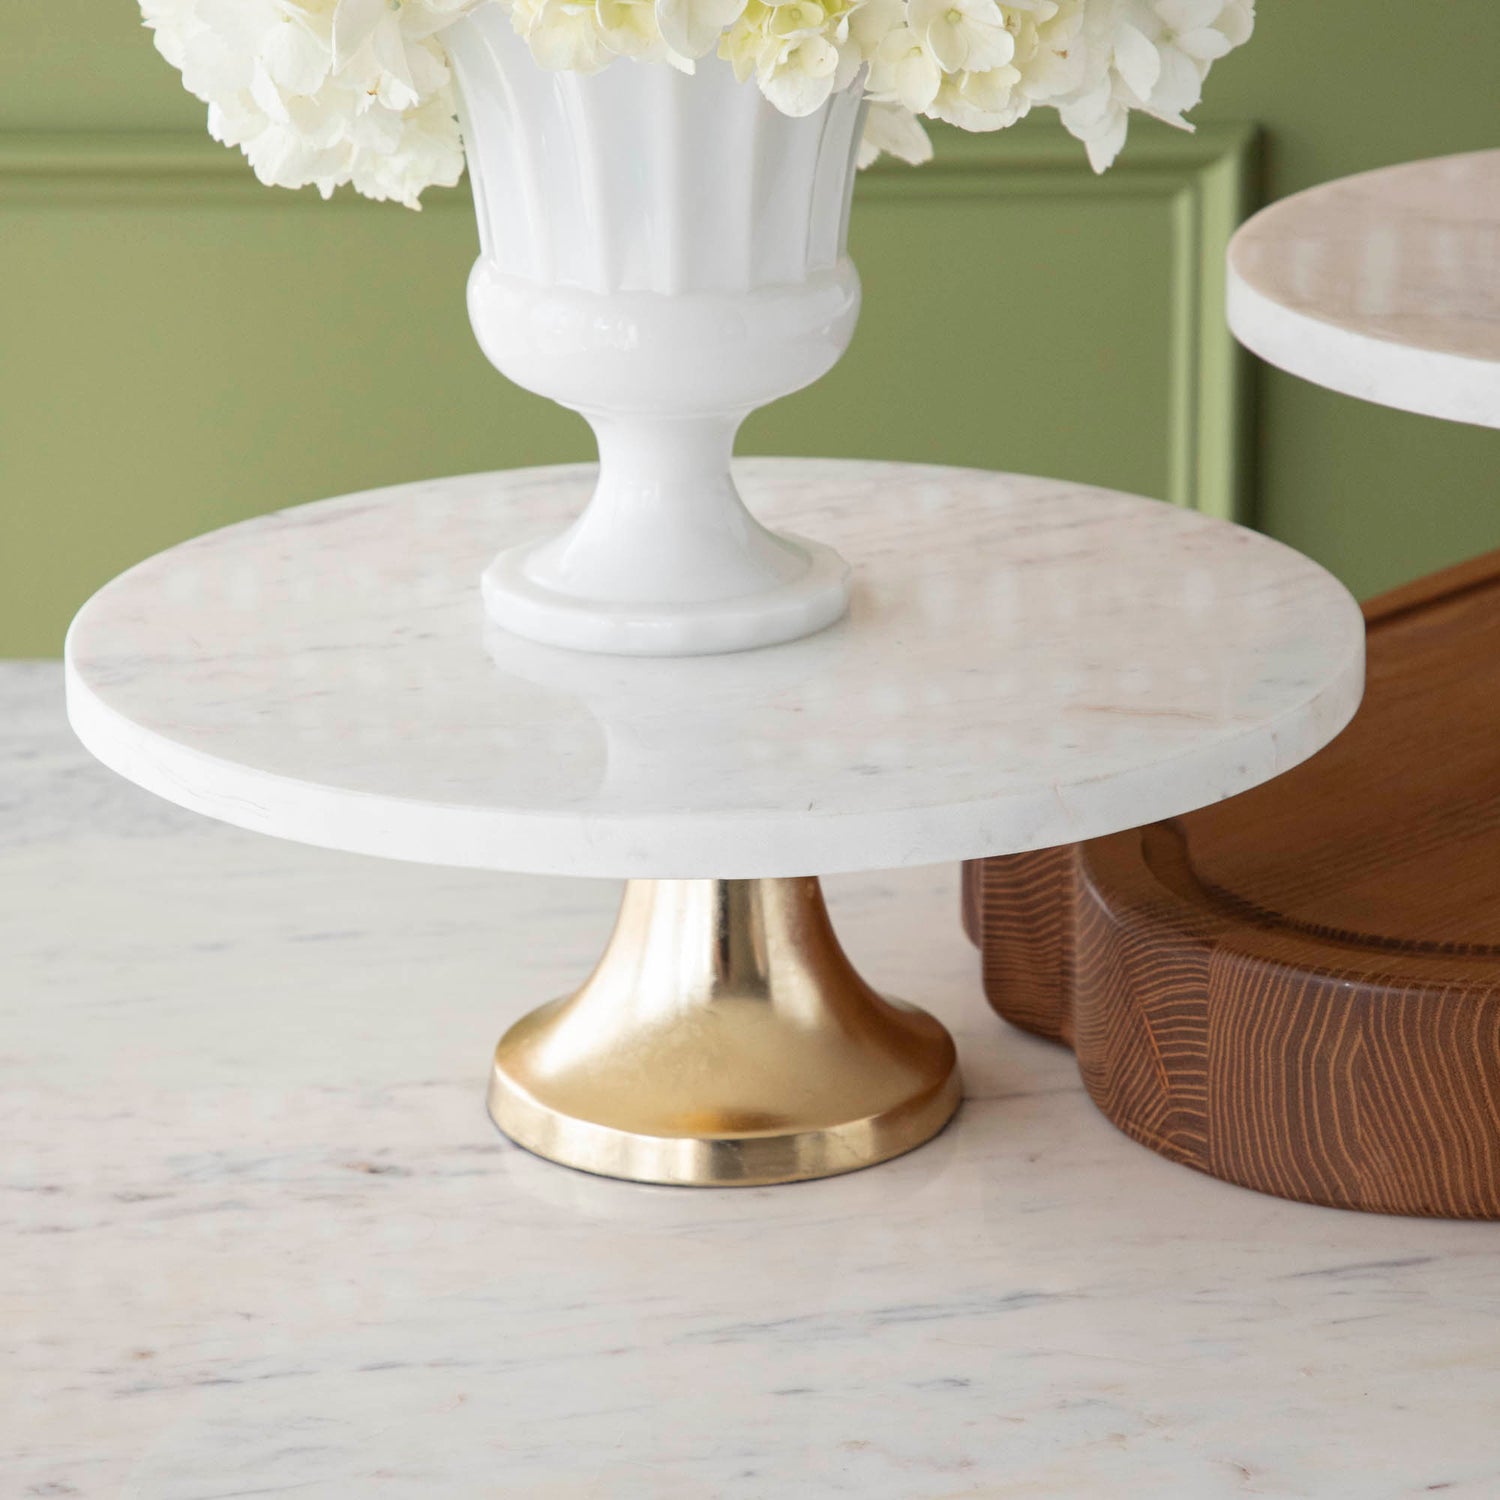 A bouquet of white hydrangeas in a white vase on a Bidk Home Marble Cake Plate with Antique Brass Base with decorative tables and a textured background.